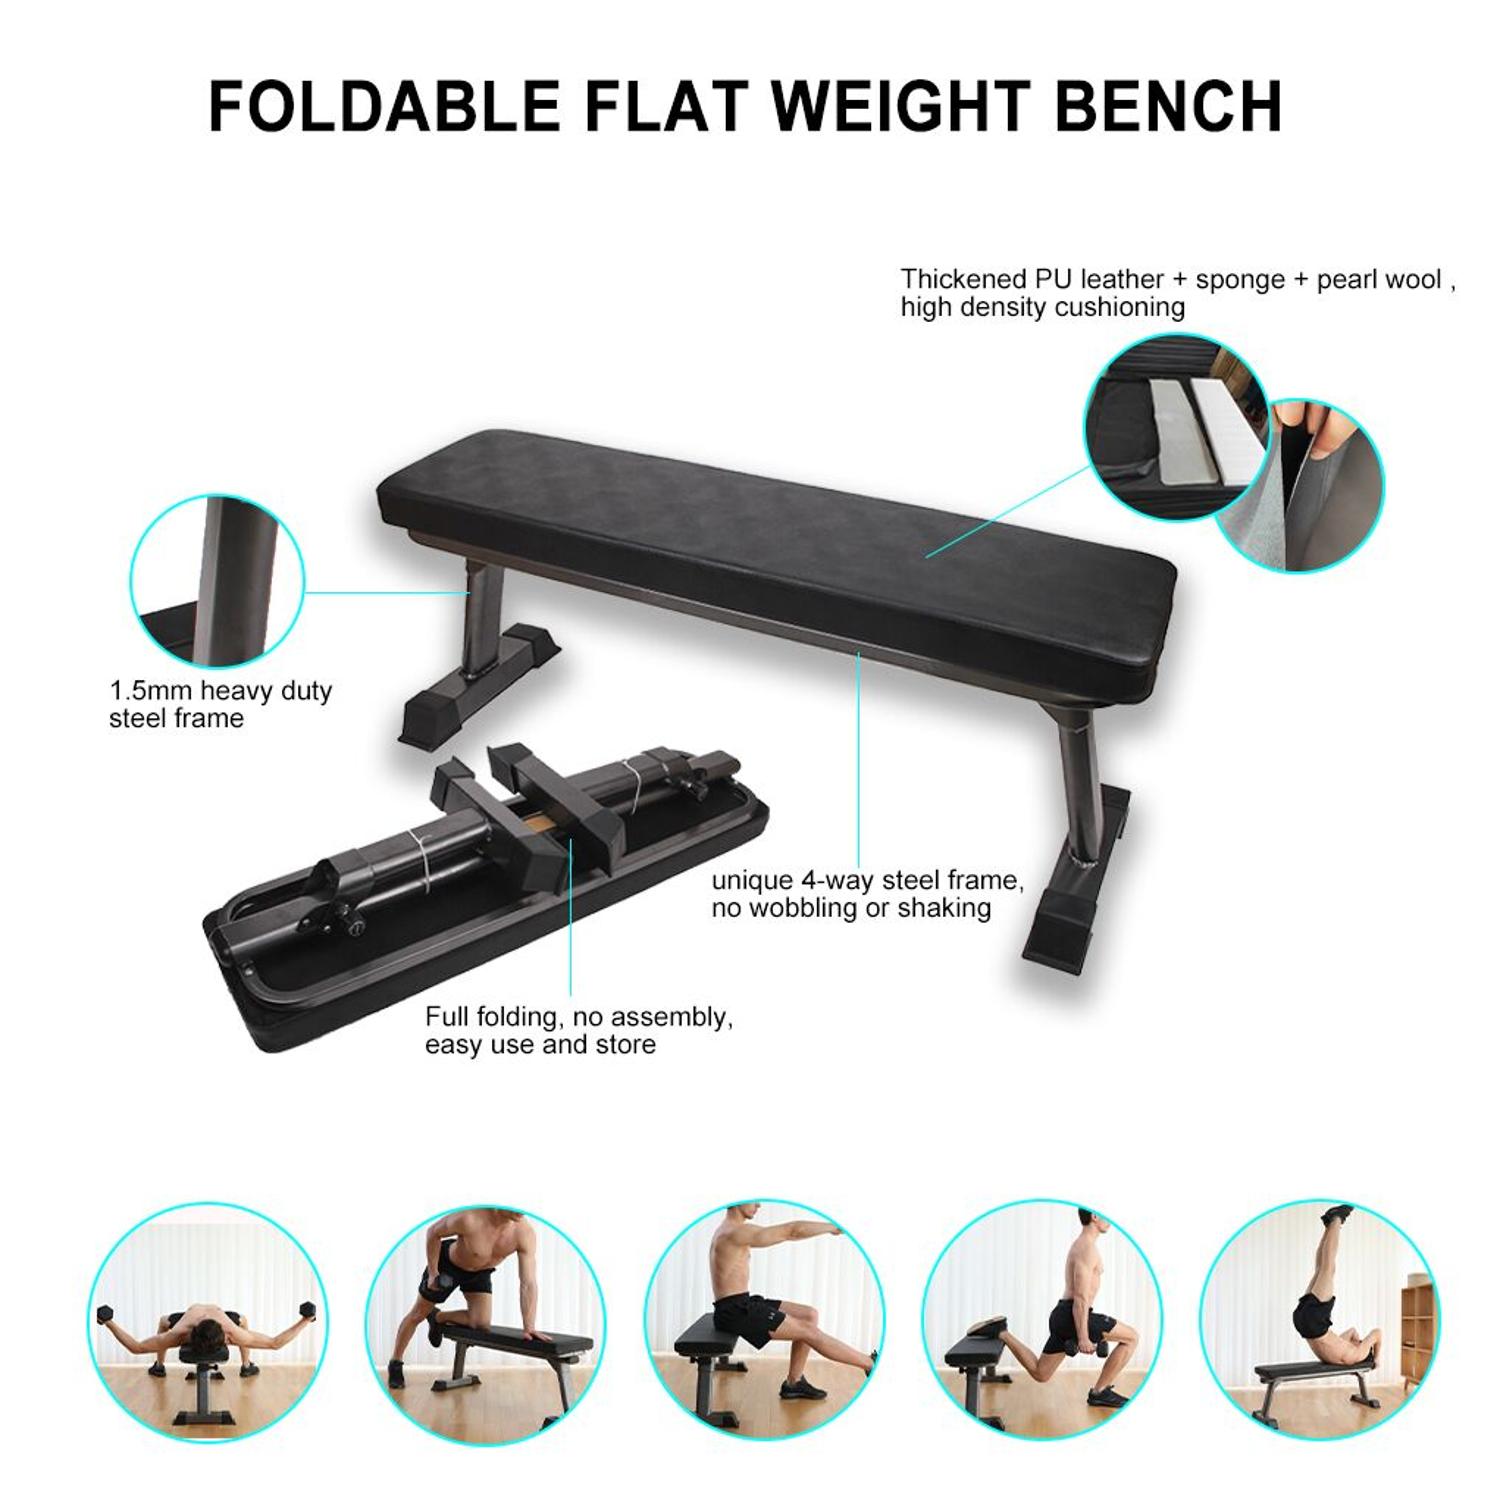 ViscoLogic Foldable Multi-purpose  Strength Training Workout Dumbbell Bench For All Body Workout